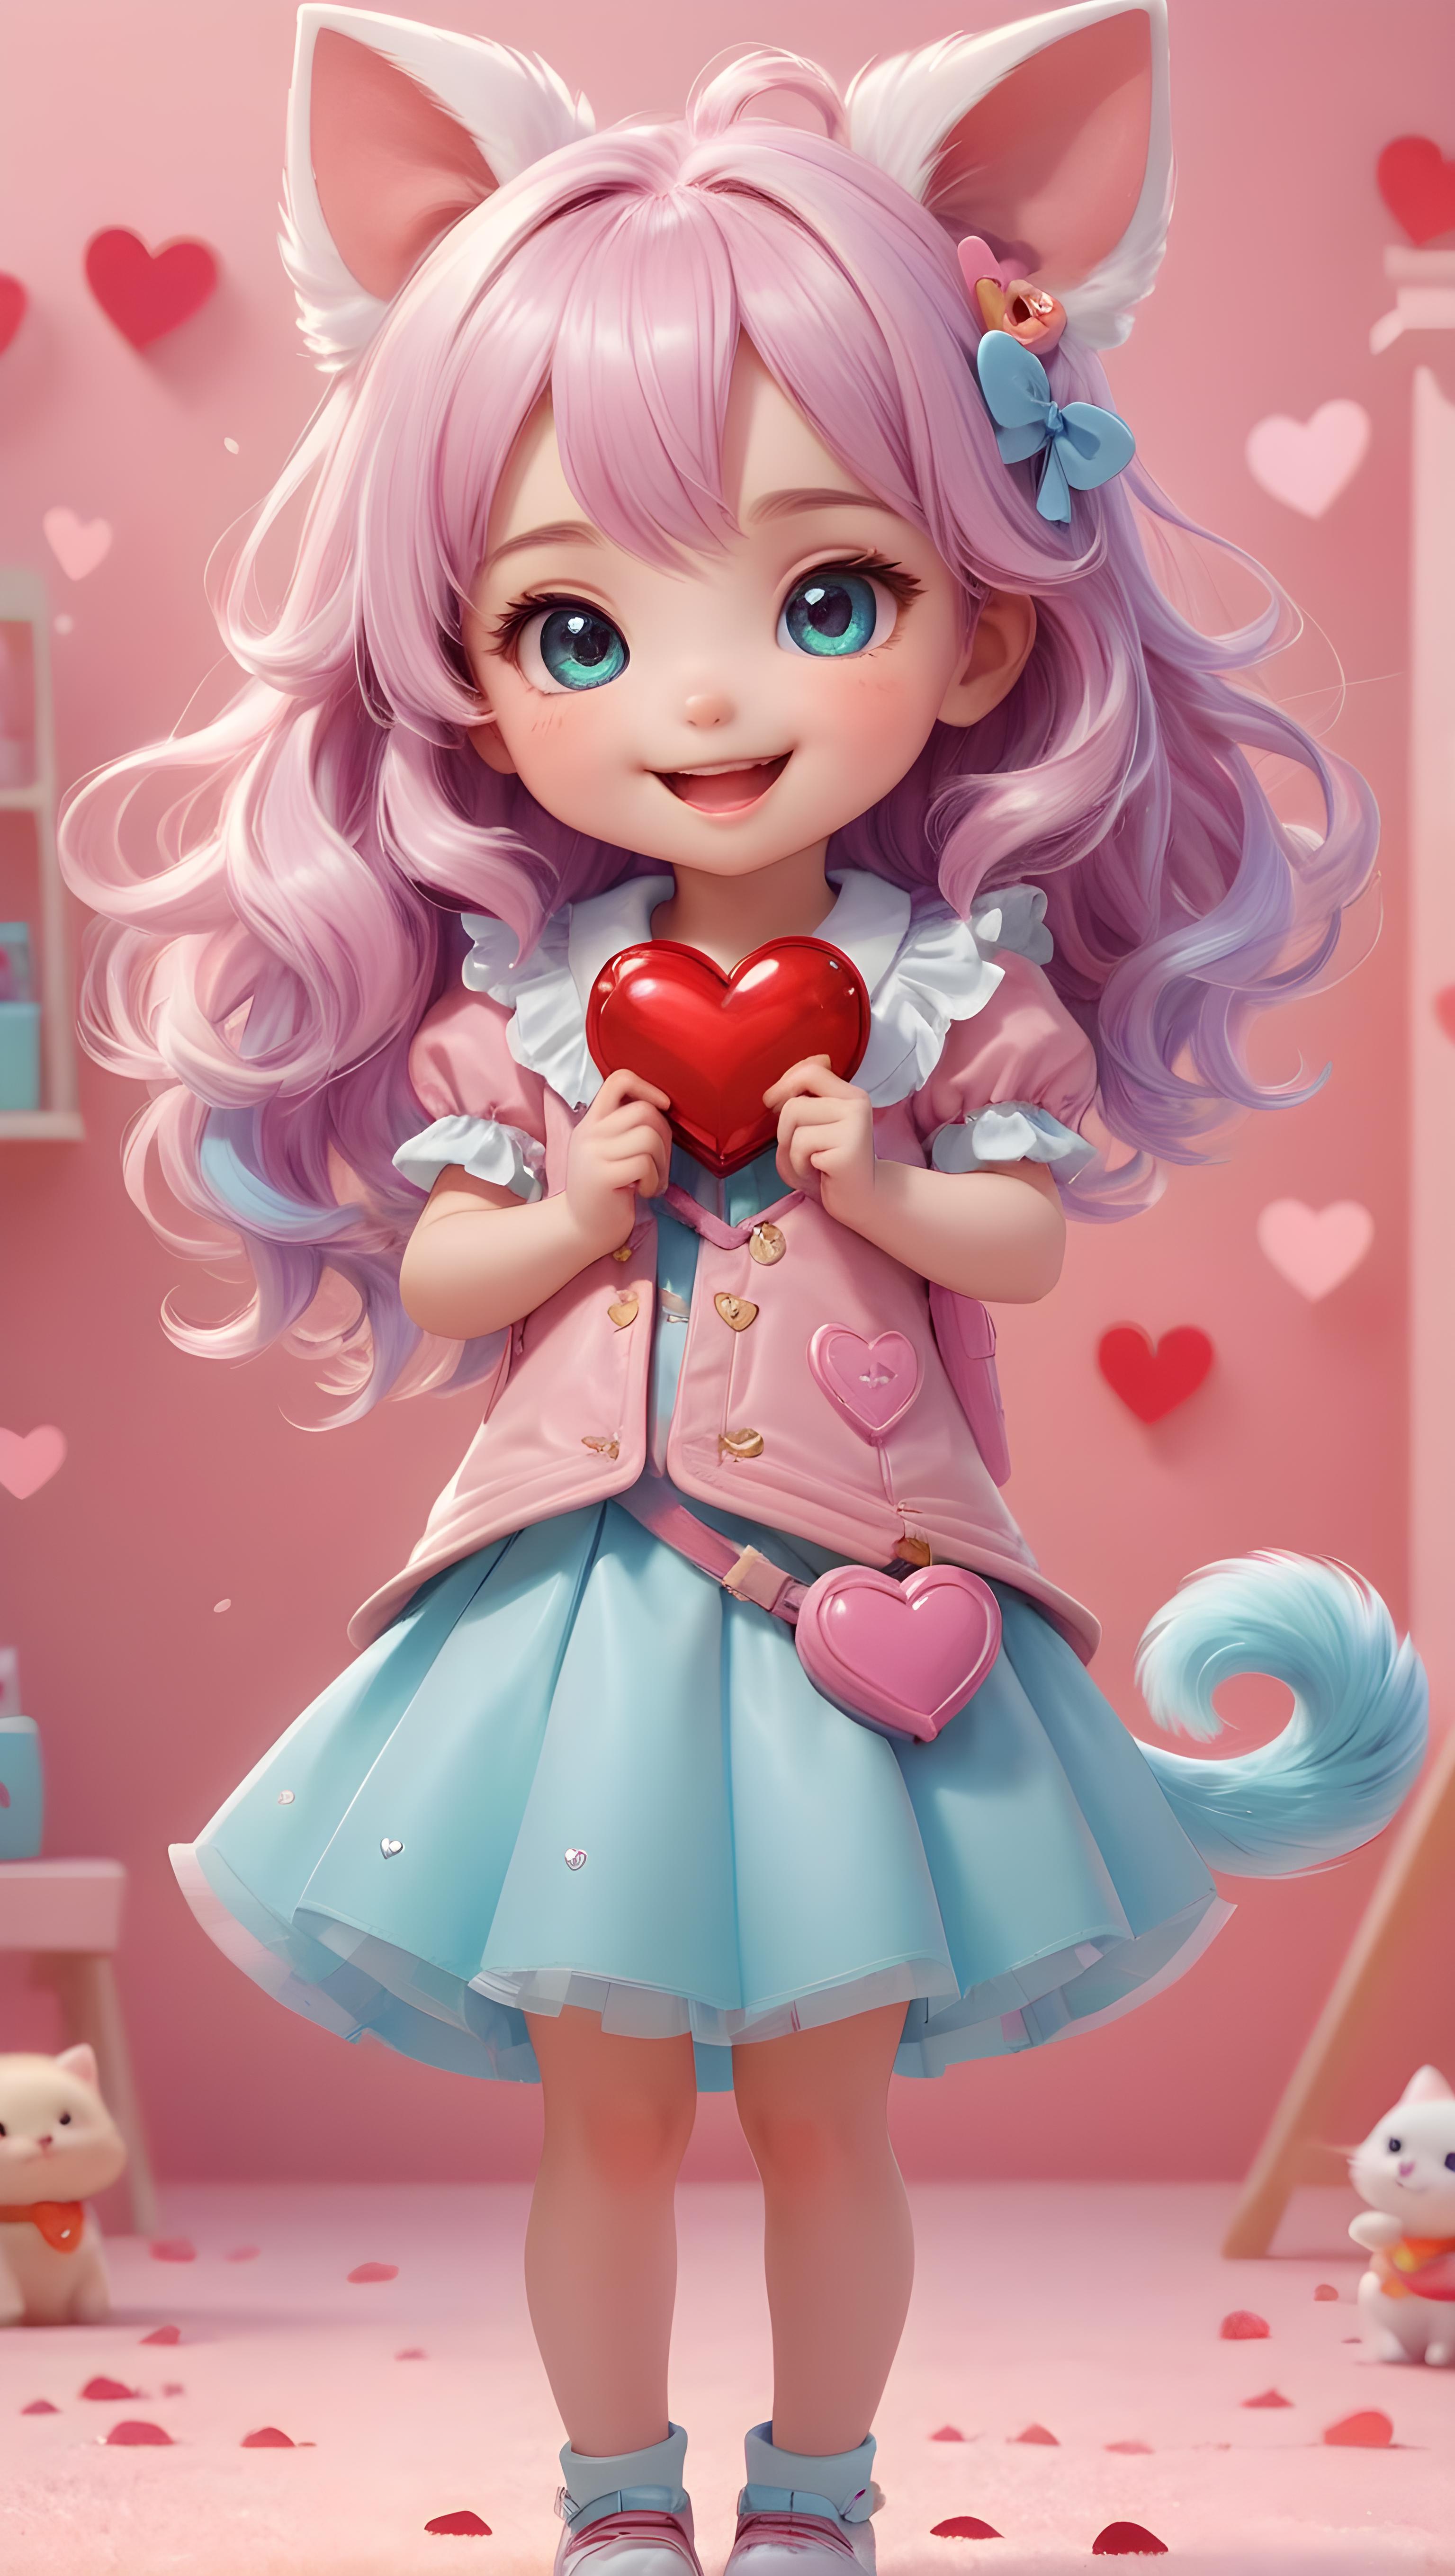 The image features a young girl wearing a pink dress, which is the main focus of the scene. She is holding a heart-shaped item, possibly a small heart or a red heart-shaped toy. The girl is also wearing a jacket, and she is positioned near a pink wall. The scene appears to be a child's bedroom, with a cup placed nearby. The girl's hair is in pigtails, and she is smiling, giving off a cheerful and happy vibe.